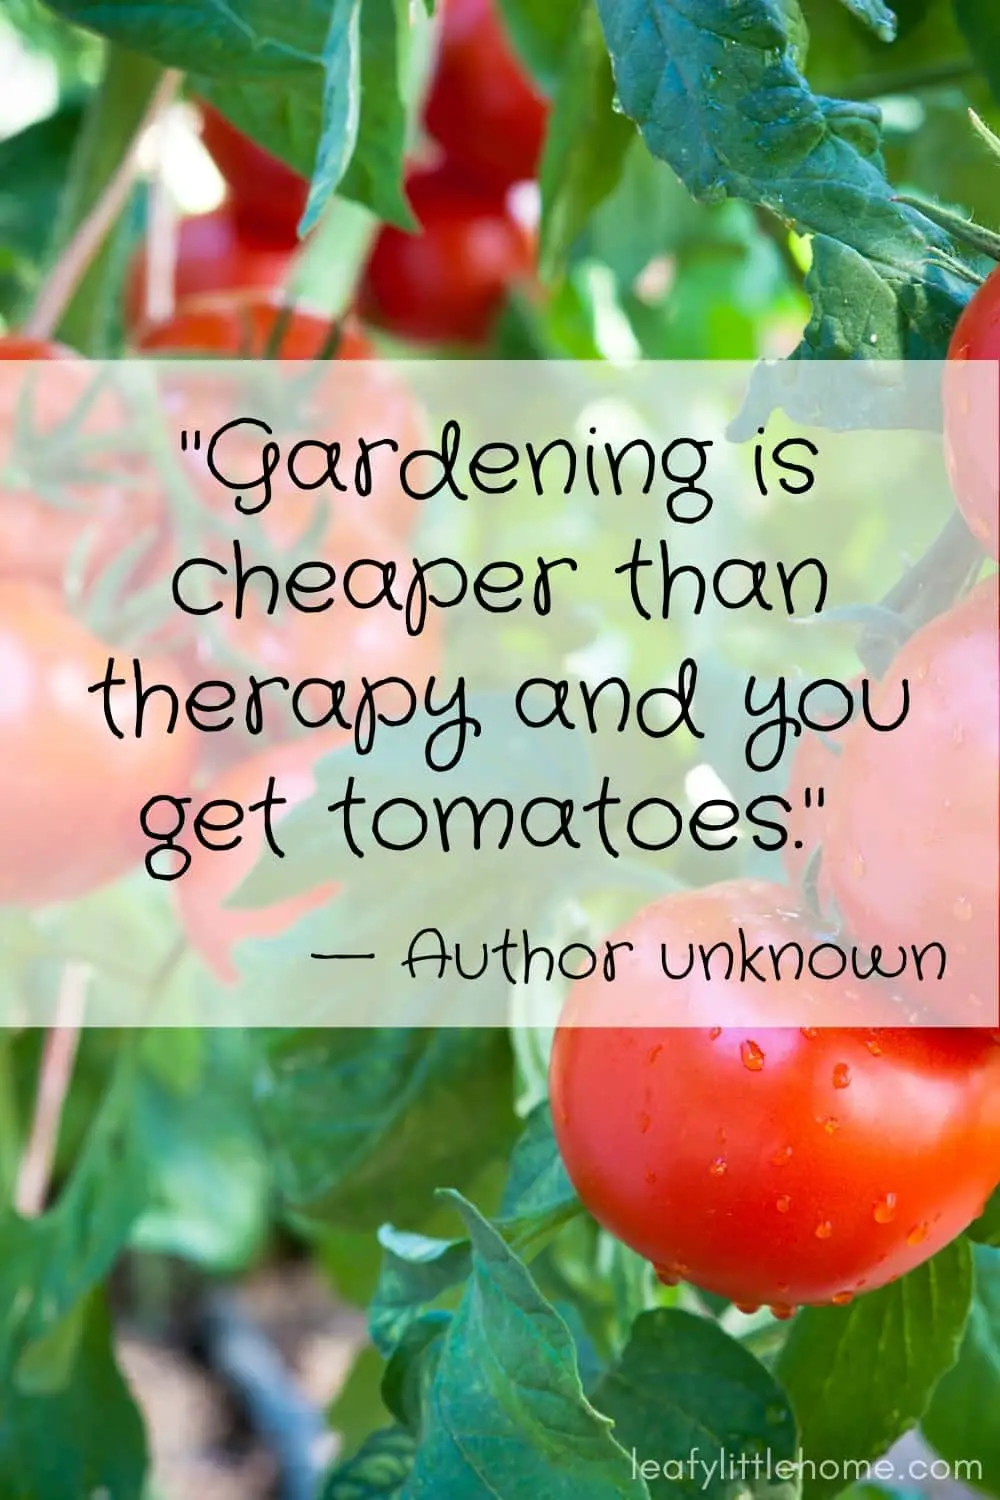 27 Inspirational Gardening Quotes (With Photos) - The Leafy Little Home